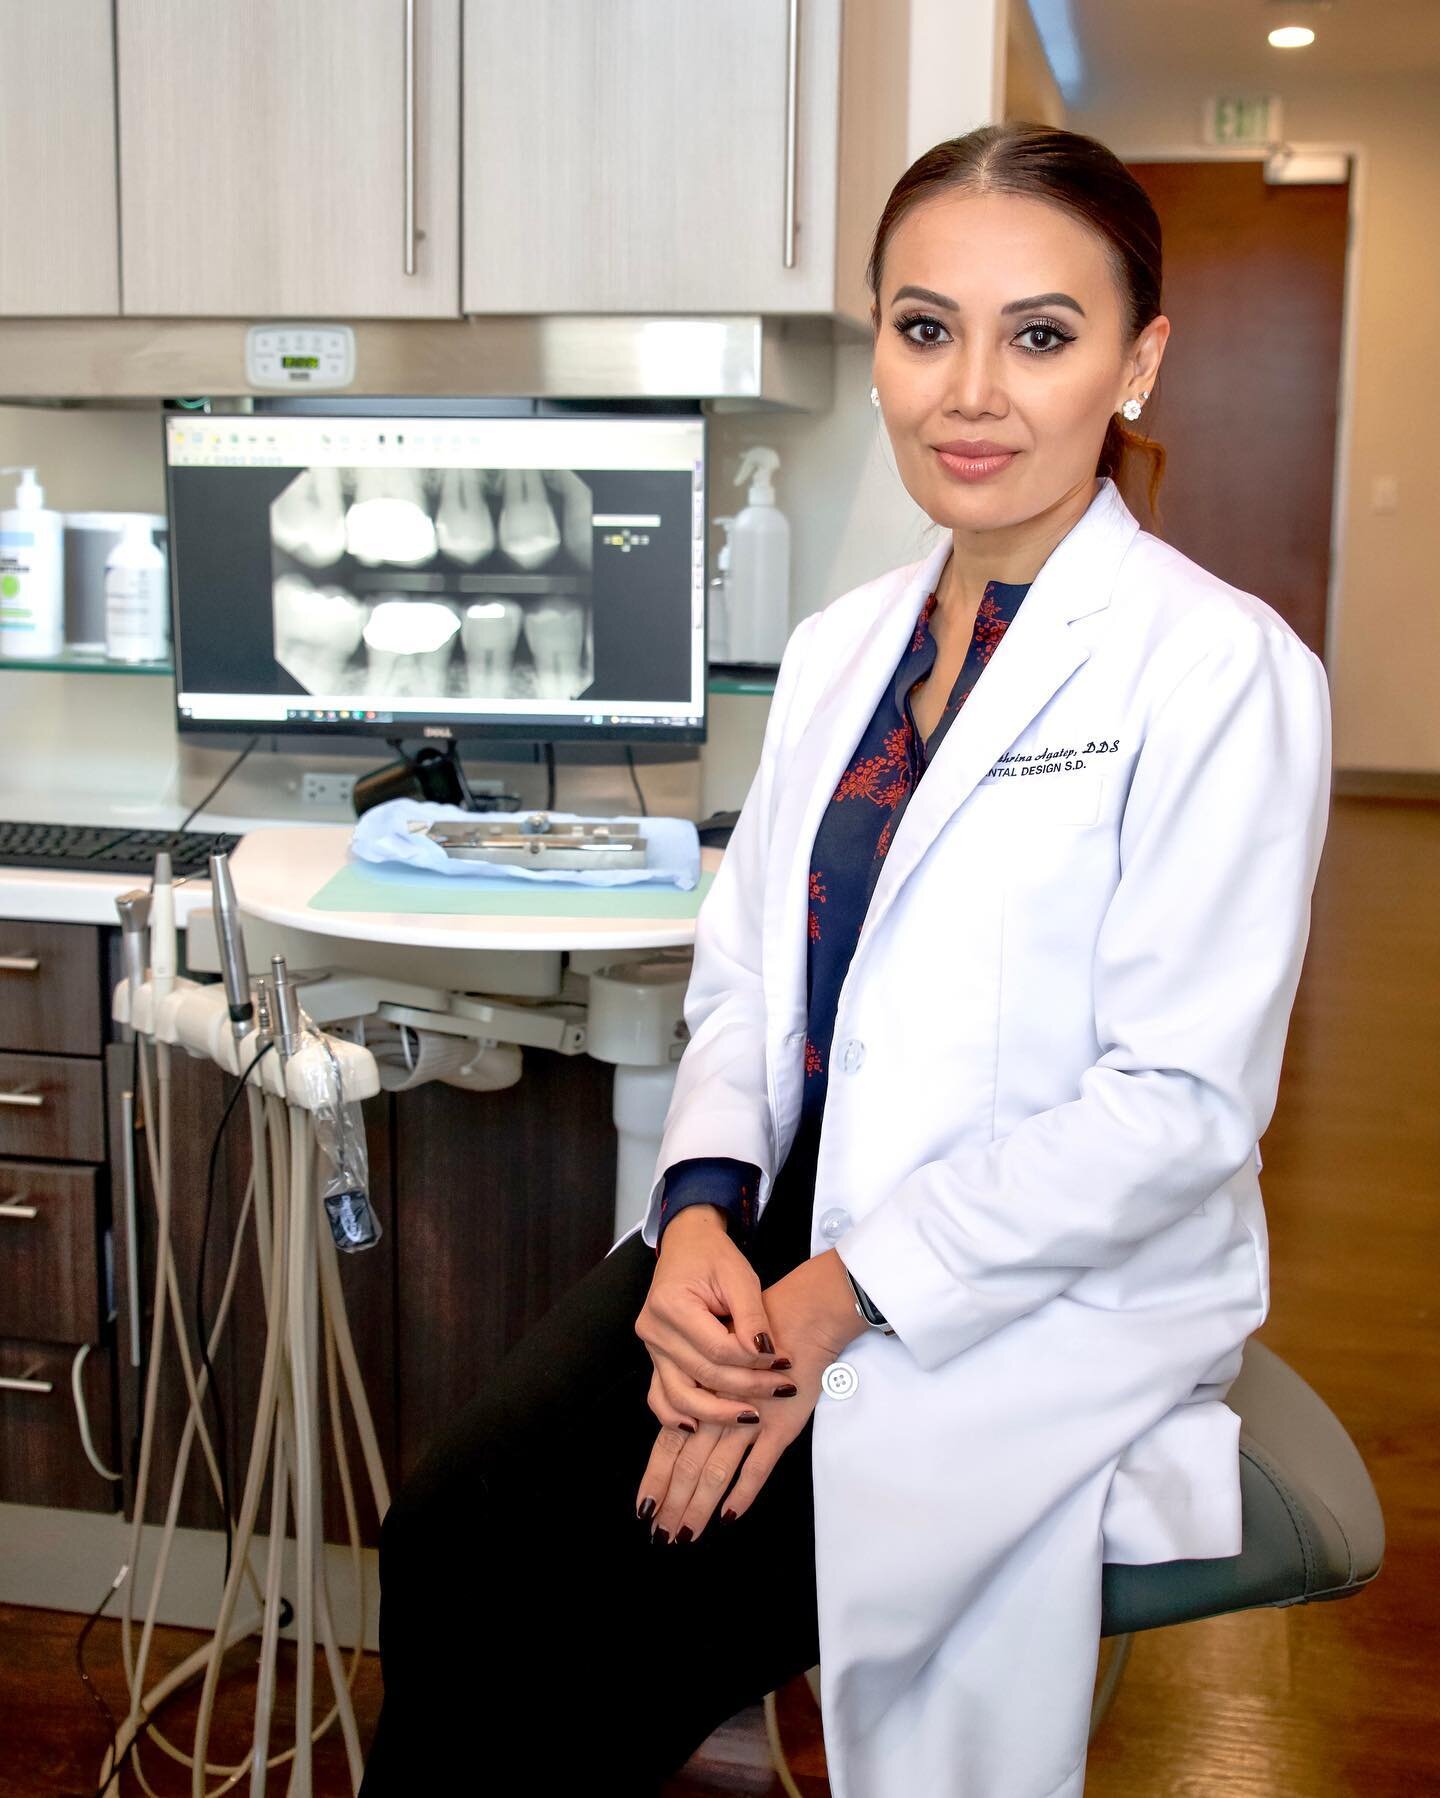 In addition to focusing on the beauty of your smile Dr. Agatep specializes in : 

➡️ TMJ Treatments 
➡️ Pinhole Surgery 

#dentistrylove #iconsofdentistry #ranchosantafe #rsfdentistry